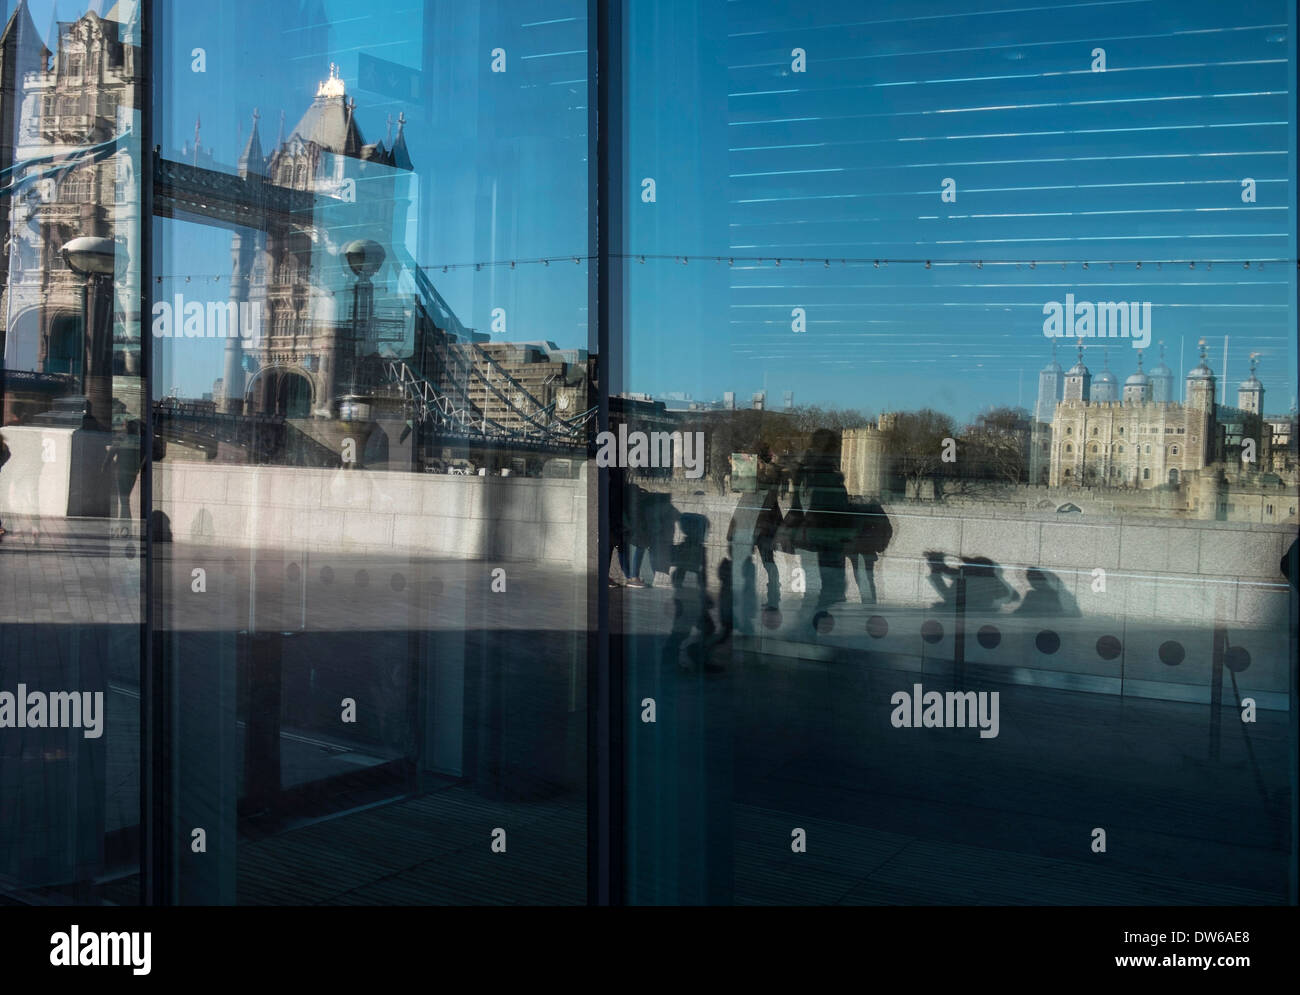 Reflections of Tower Bridge and The Tower of London in a large window. Stock Photo